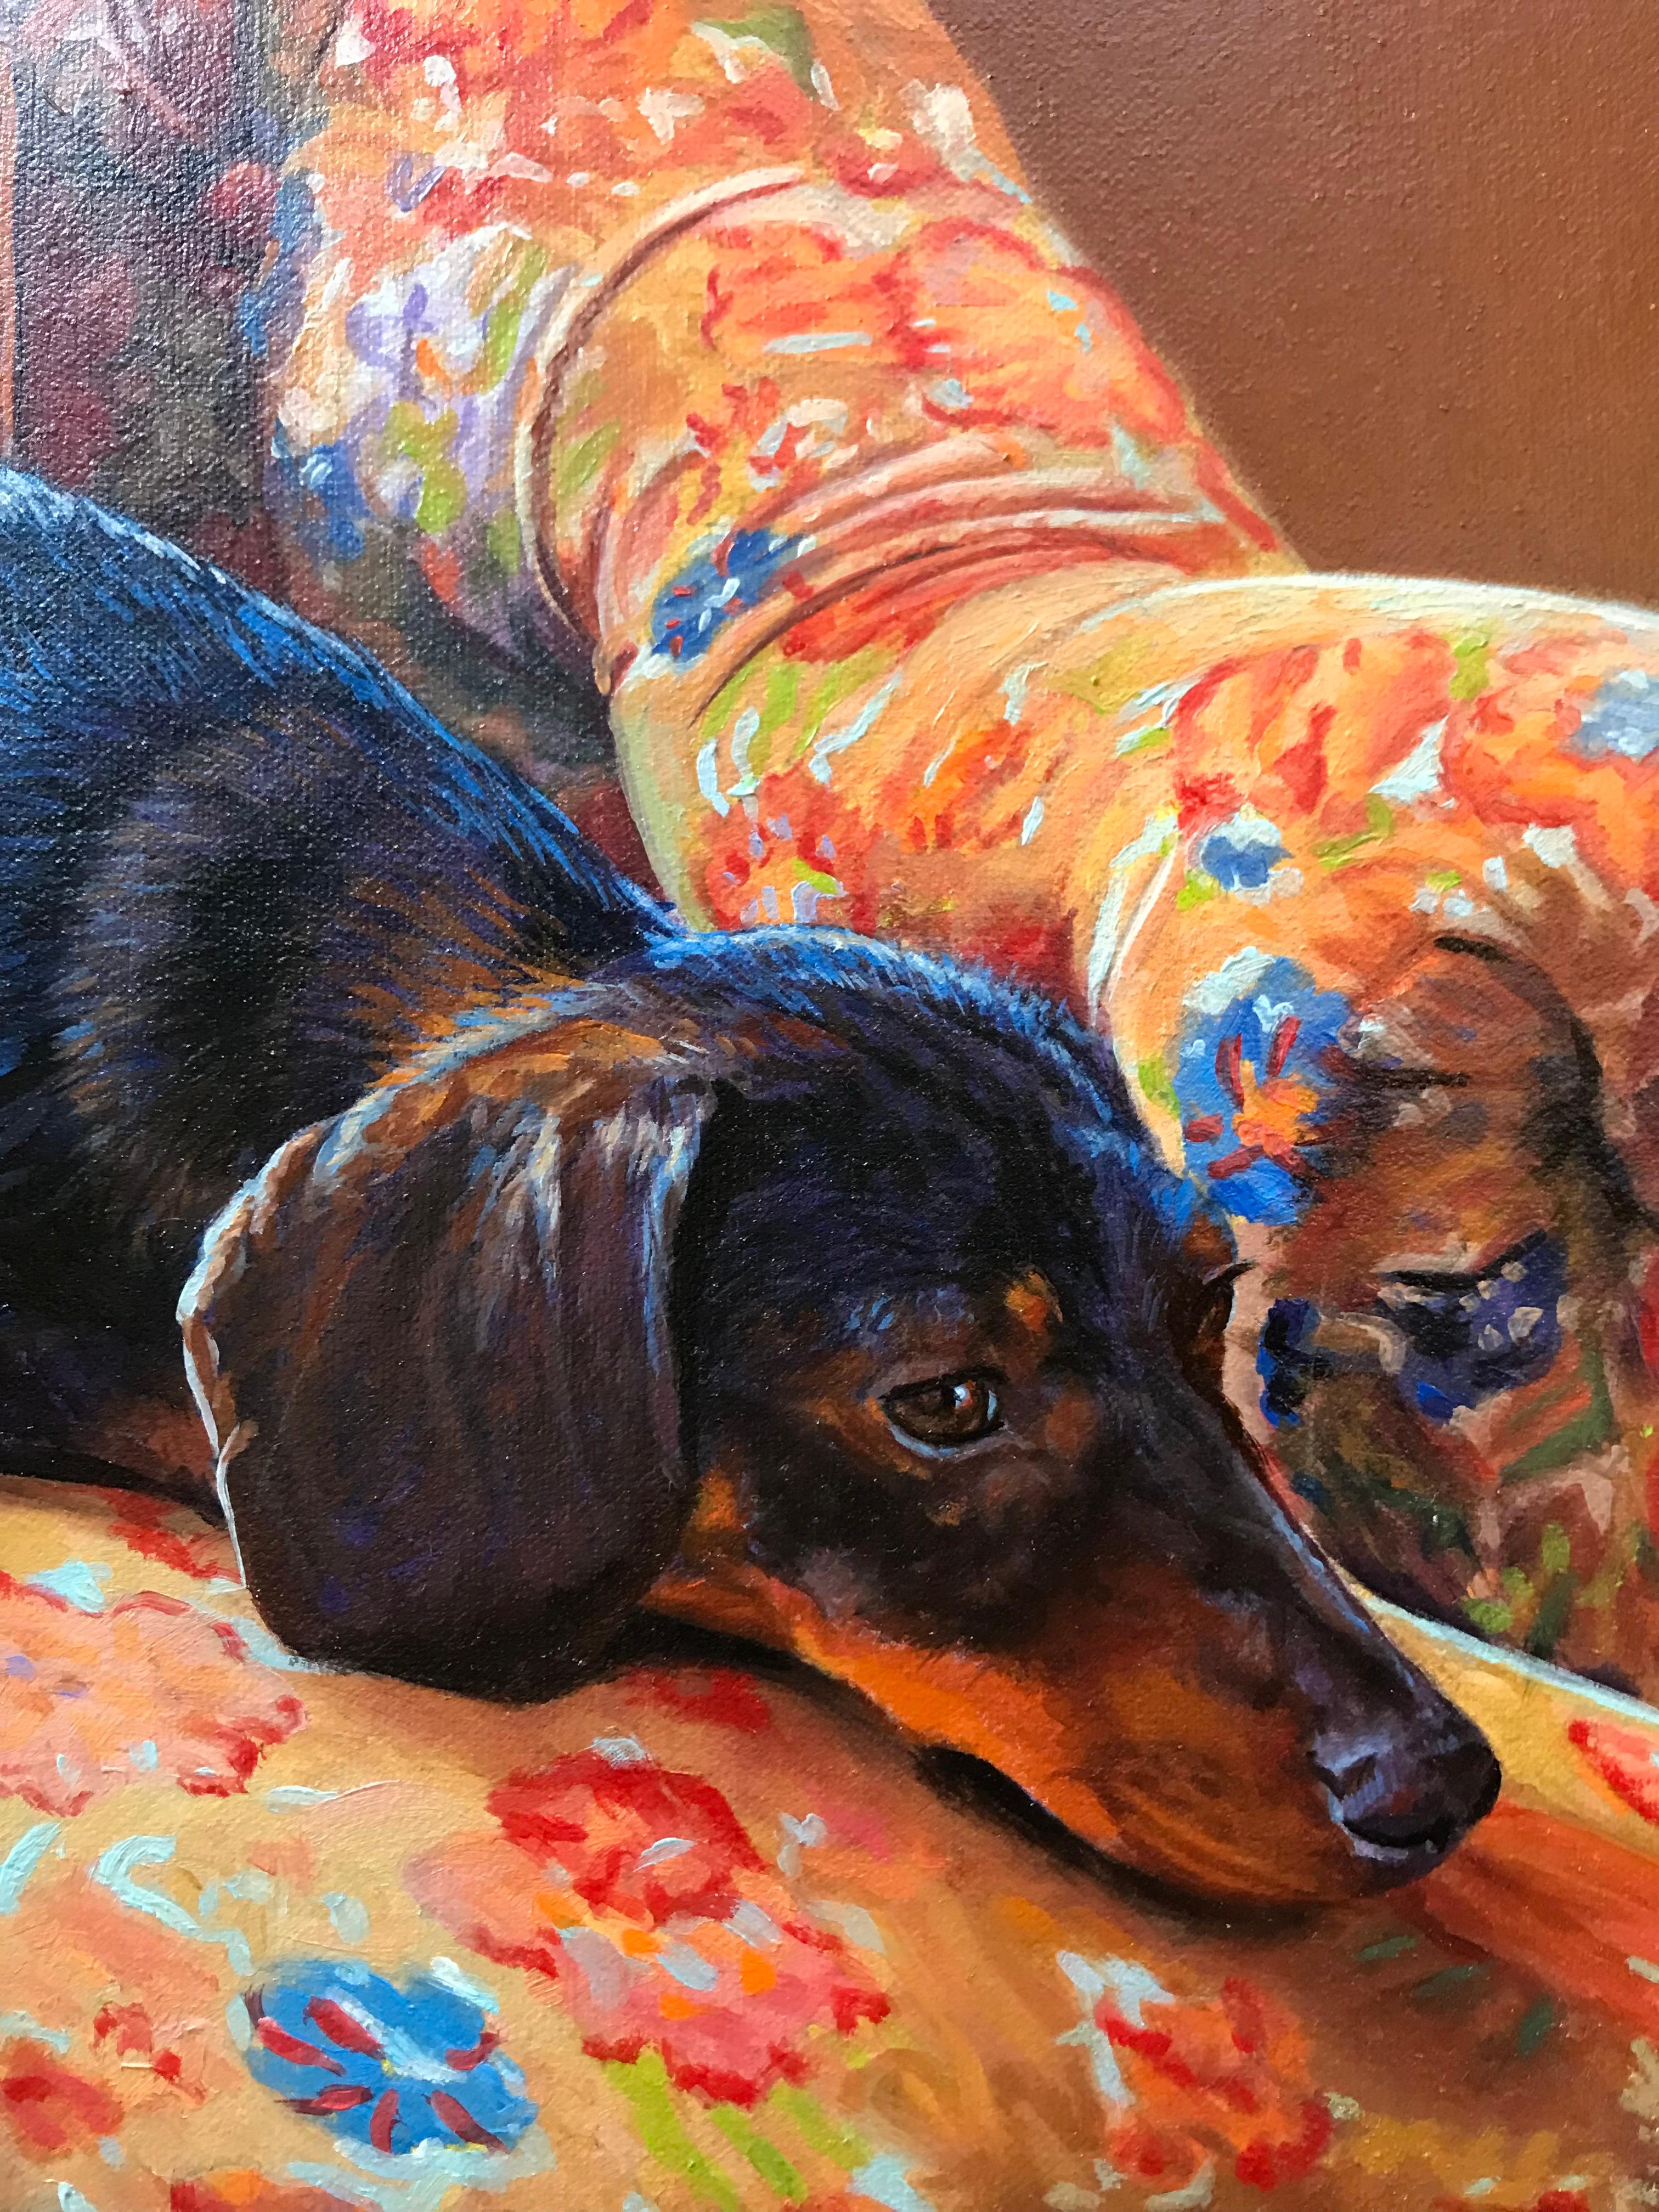 Vivid Dachshund realist painting on blue and yellow chair by animal portraitist - Painting by Roger Henry